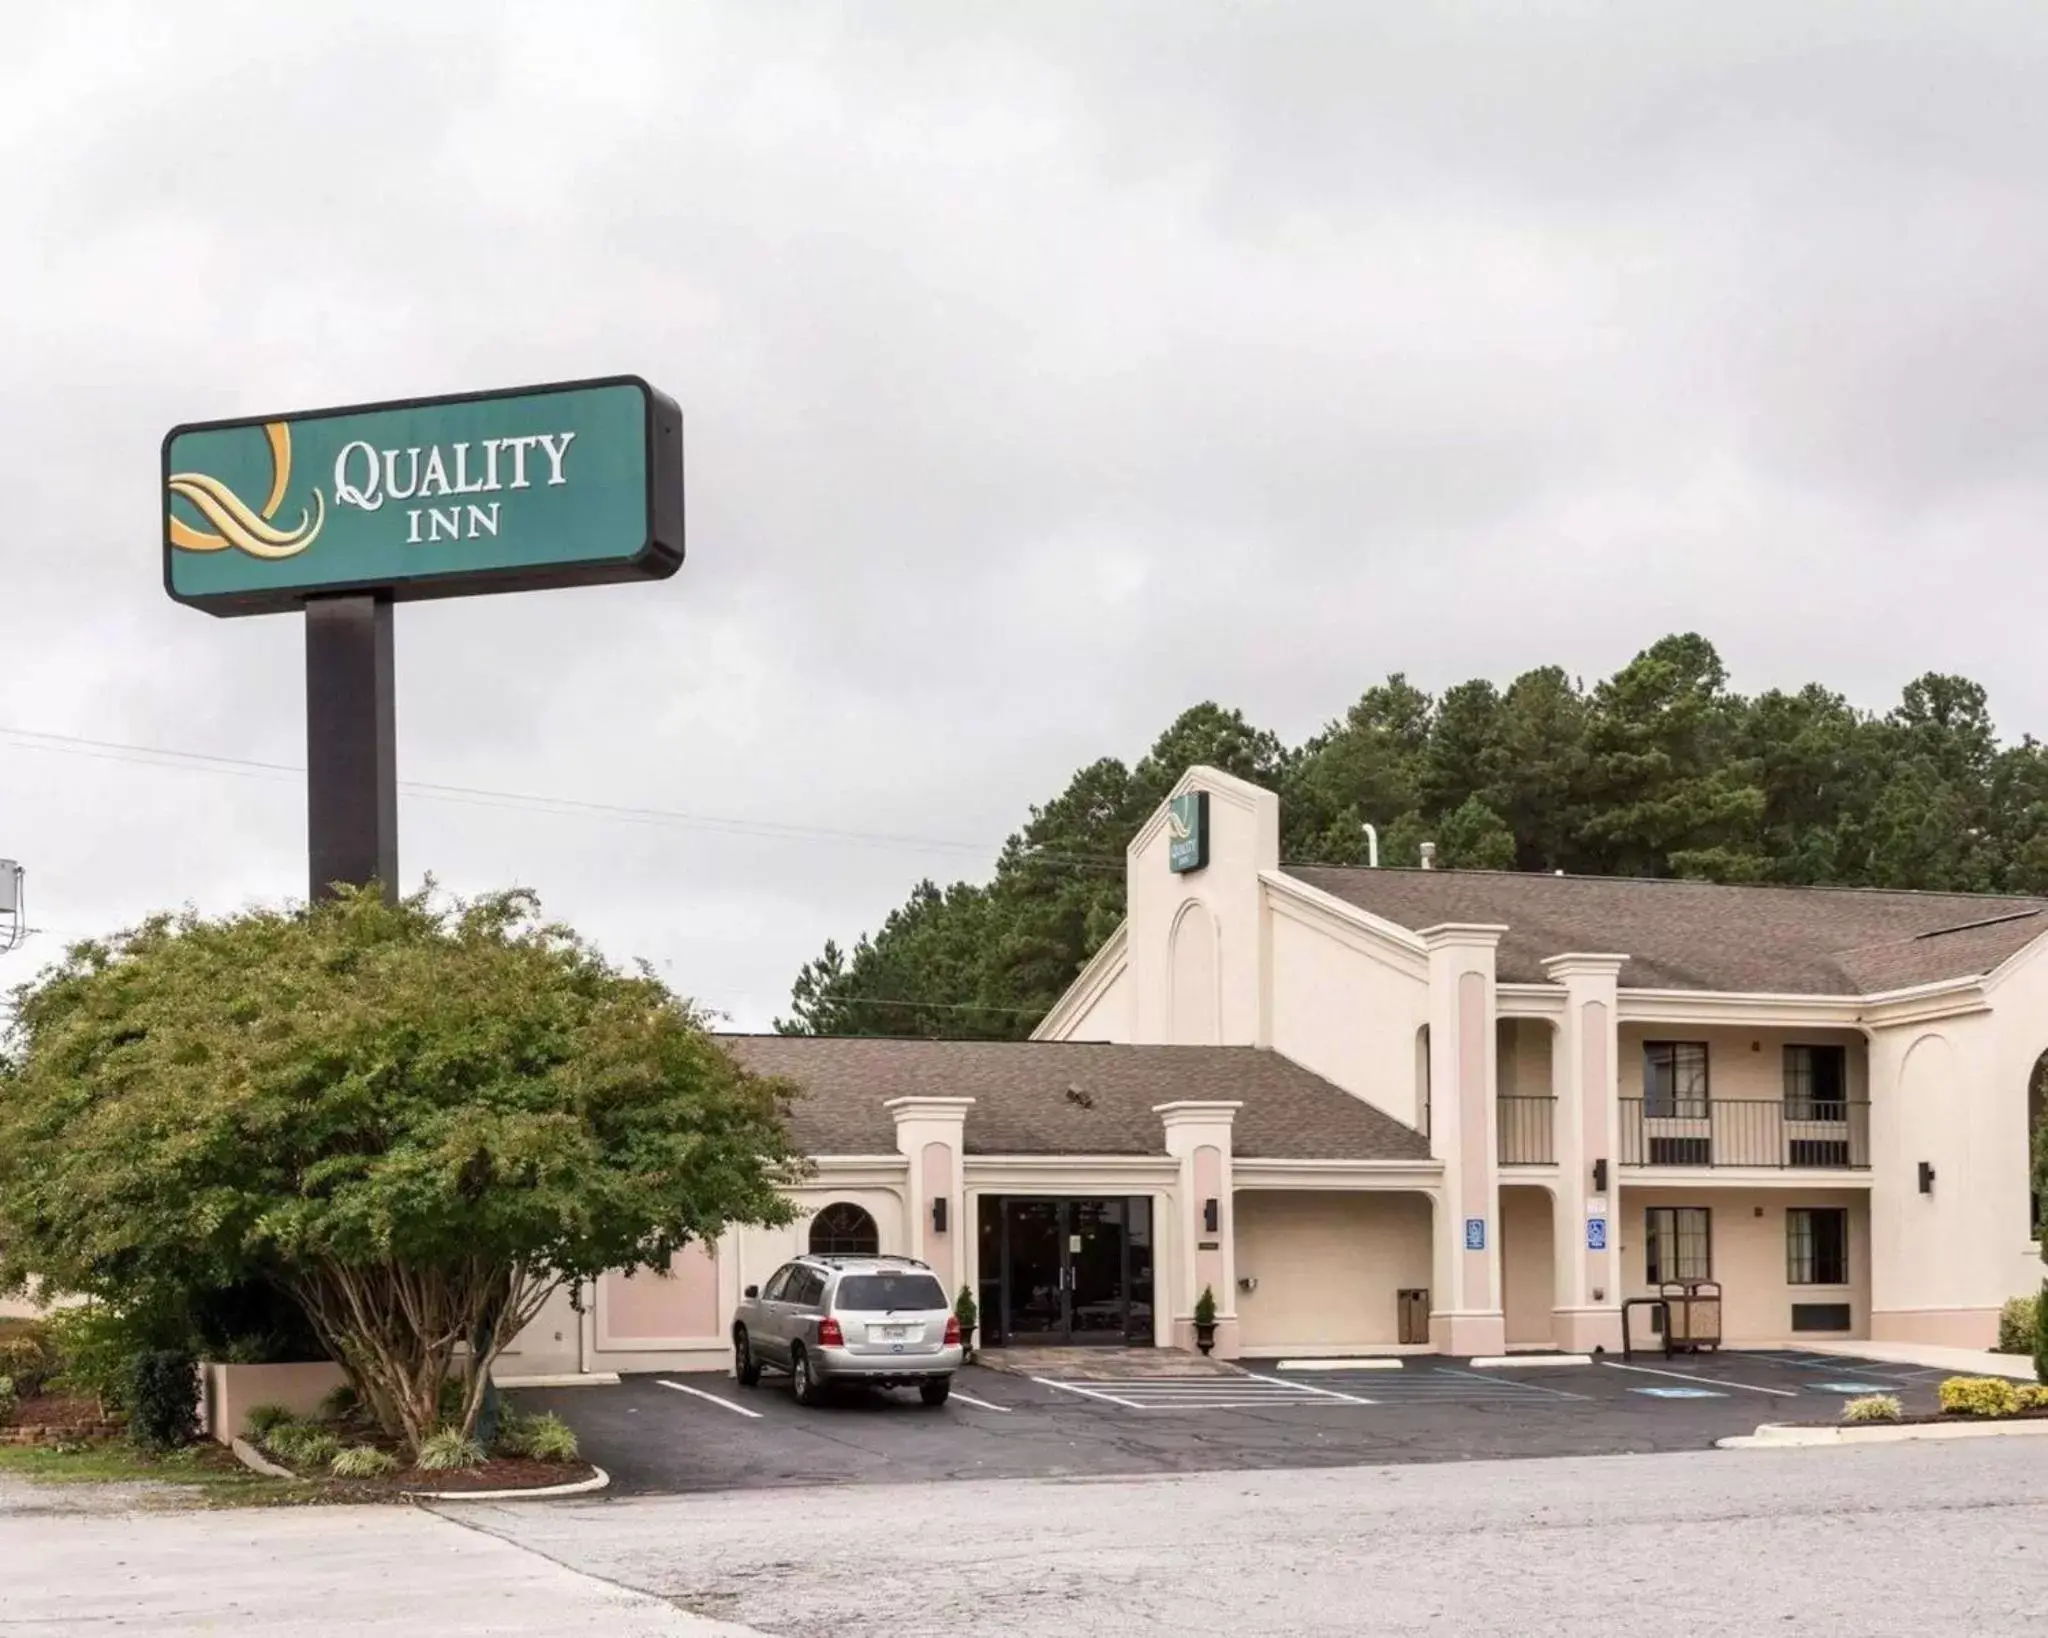 Property building in Quality Inn South Hill I-85